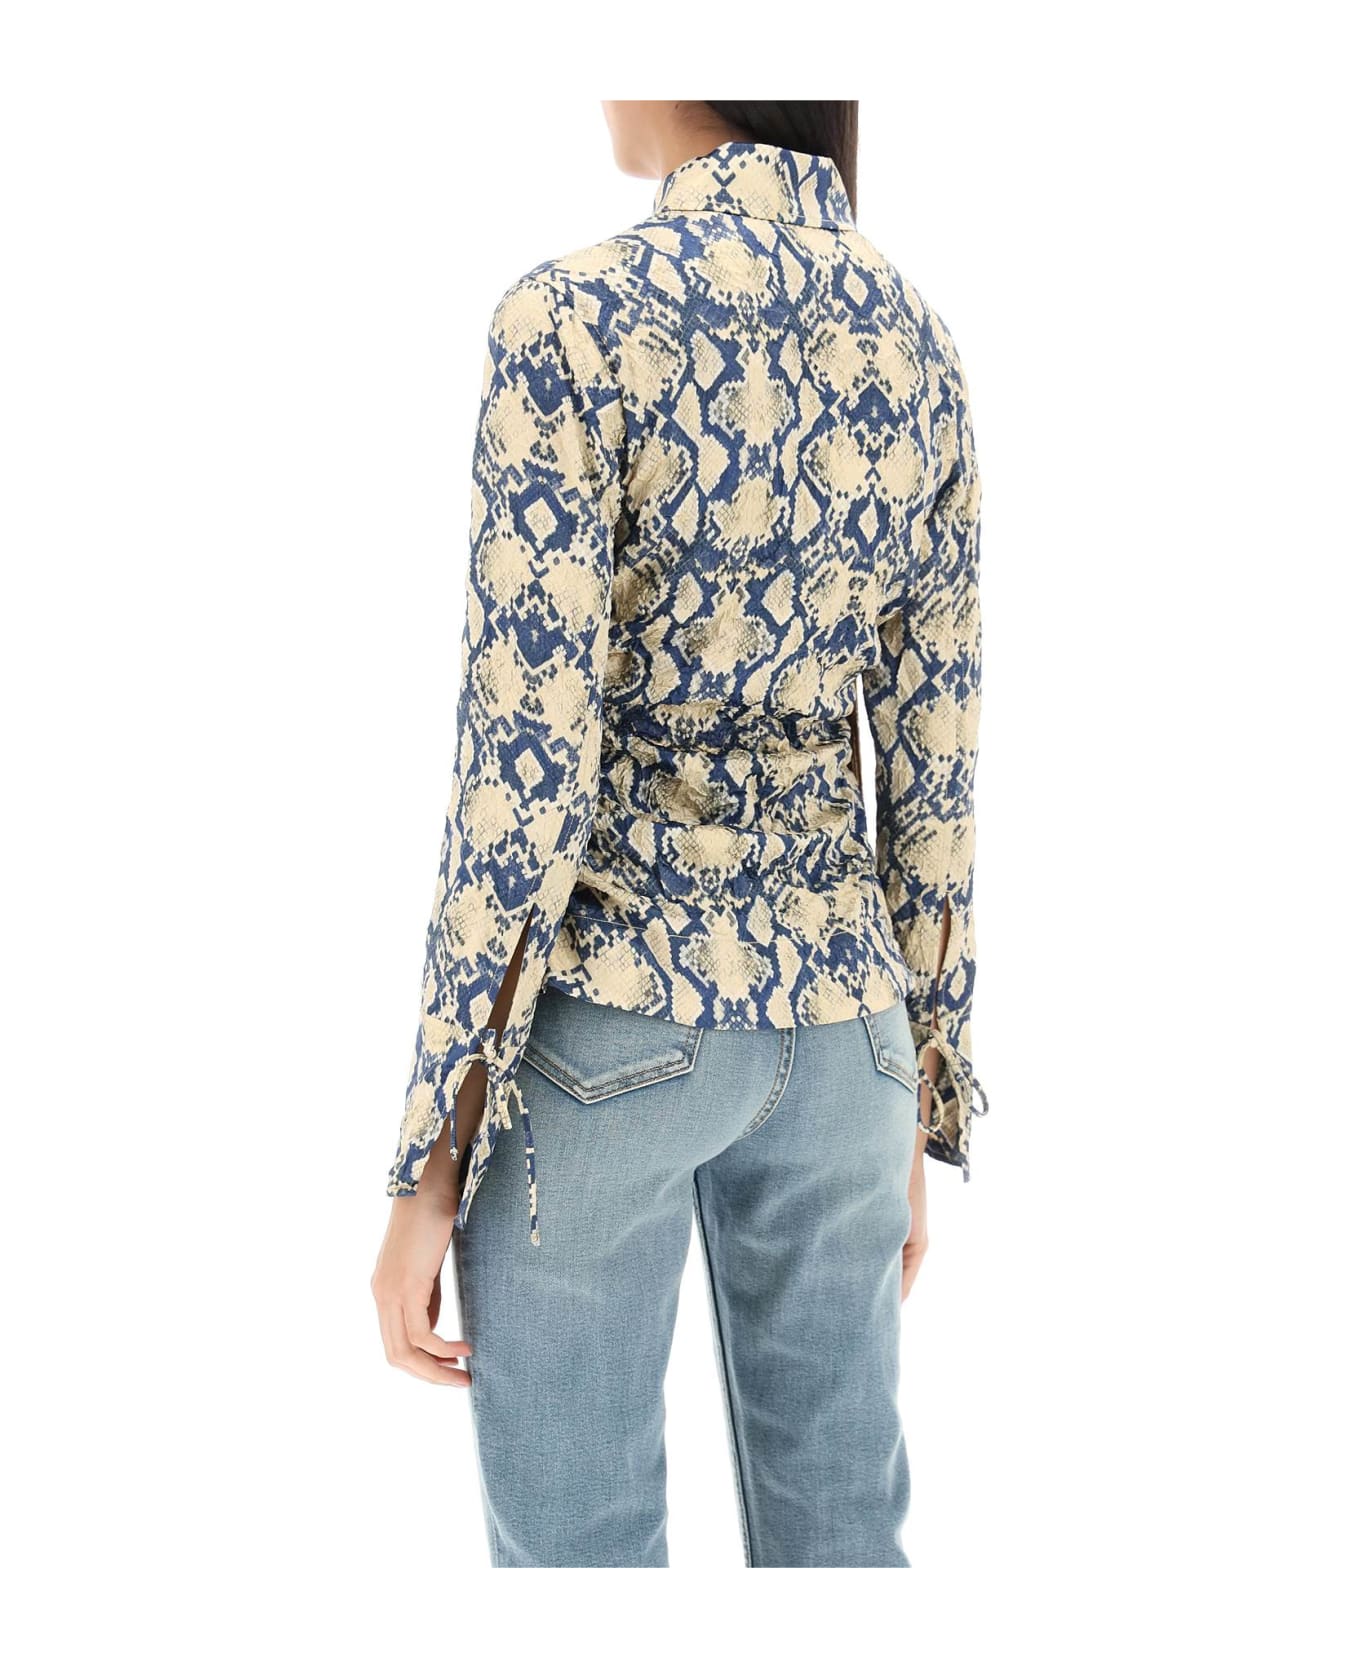 Ganni Crinkled Satin Shirt With Snake Print - Multicolore